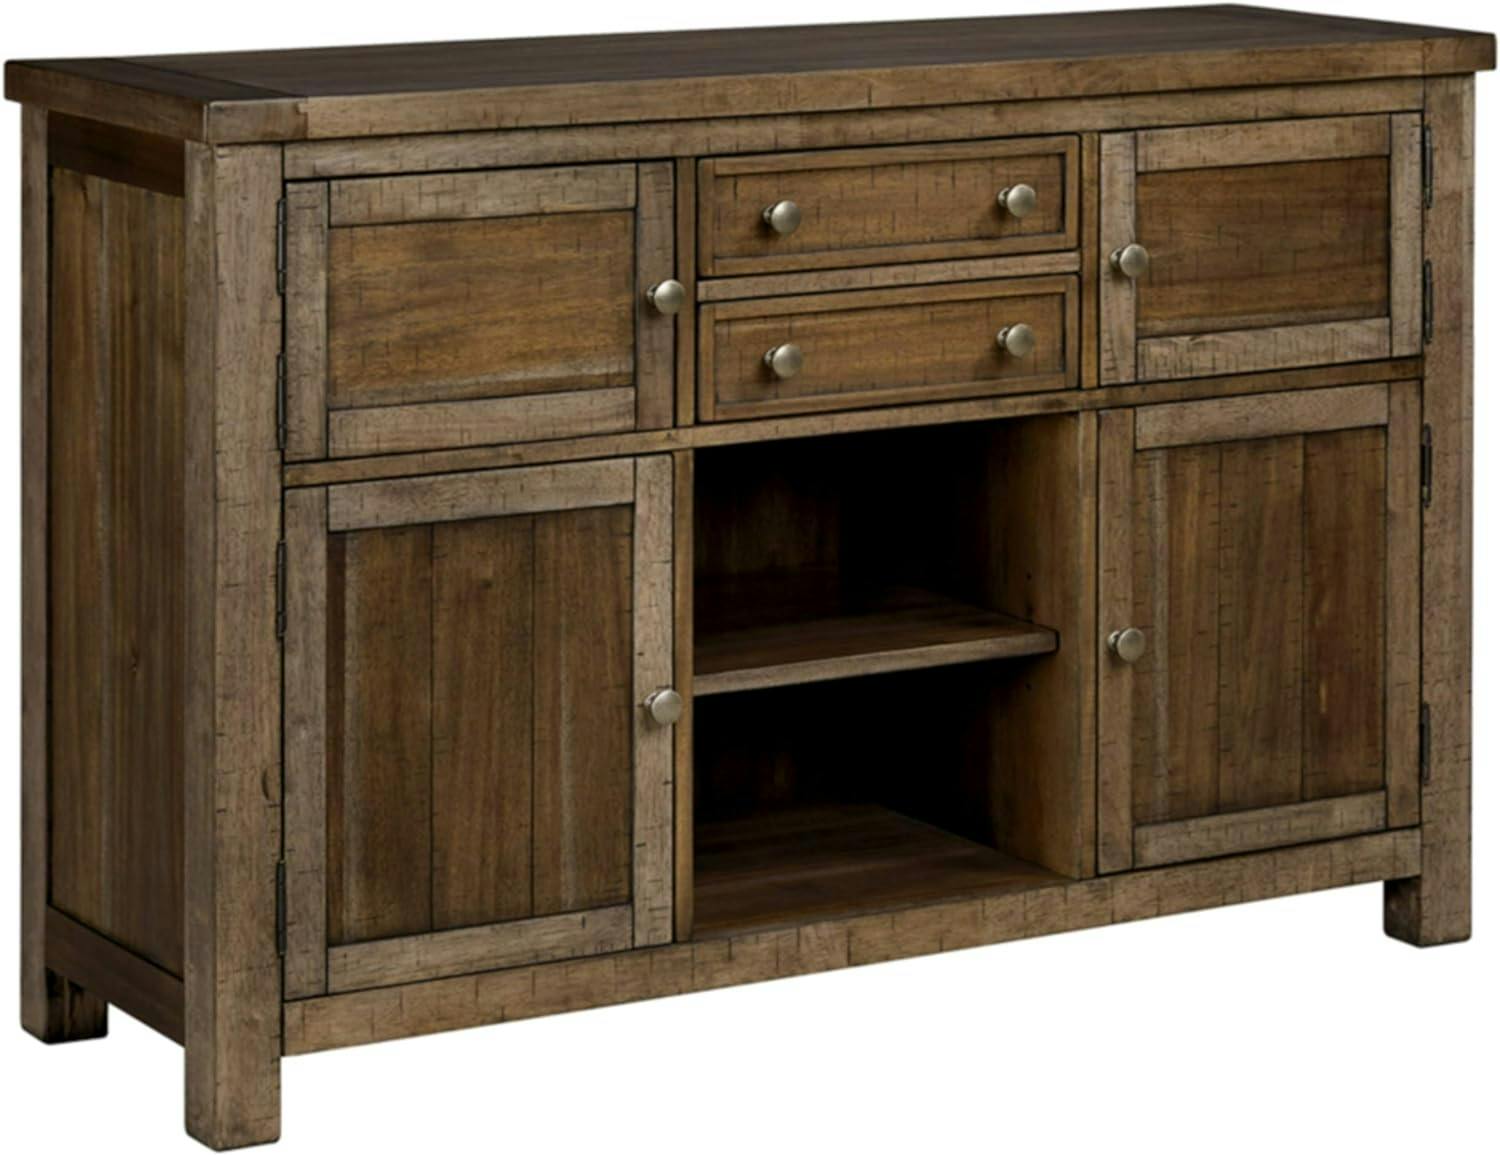 Transitional Nutmeg Brown 56" Server with Plank-Effect Details